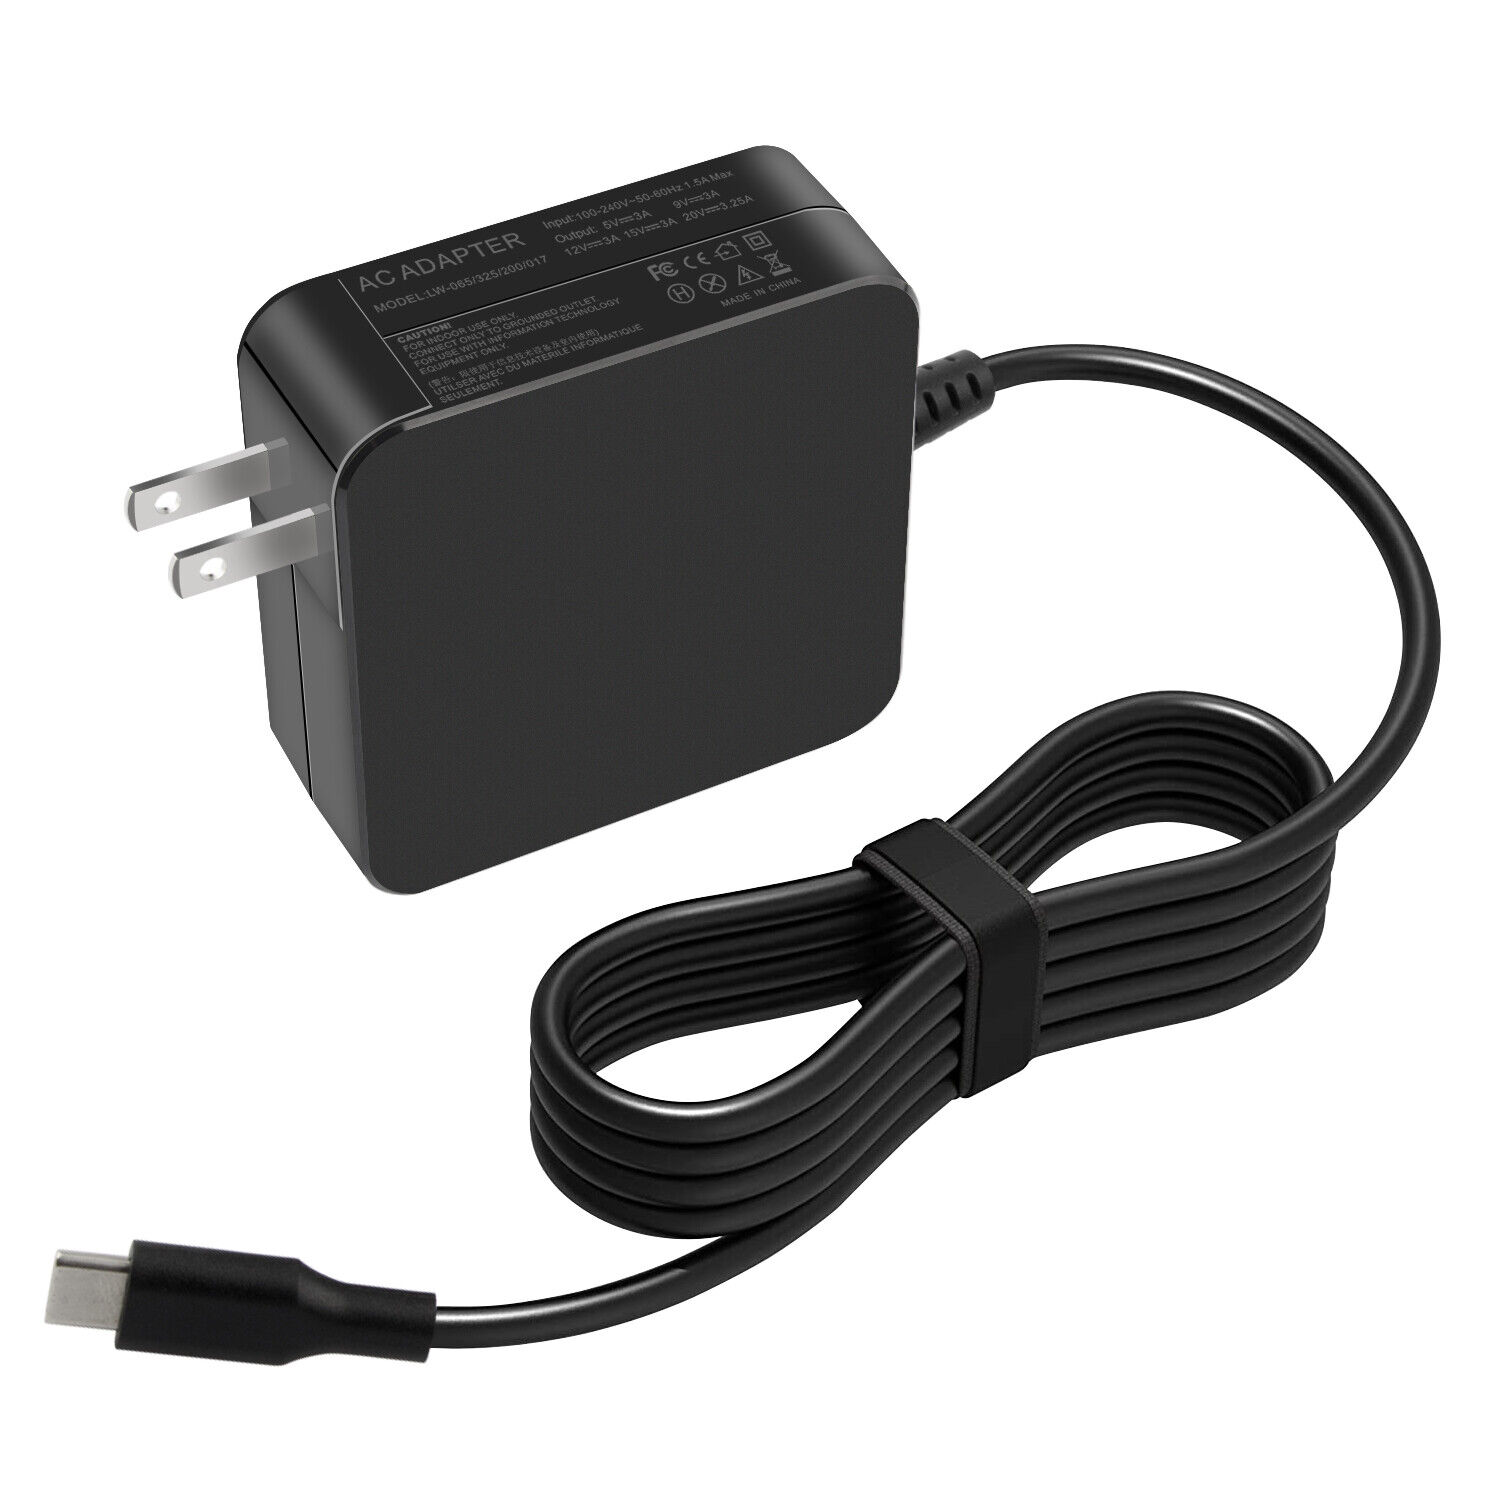 USB C Type C Charger Adapter Power Supply for MacBook Pro 12